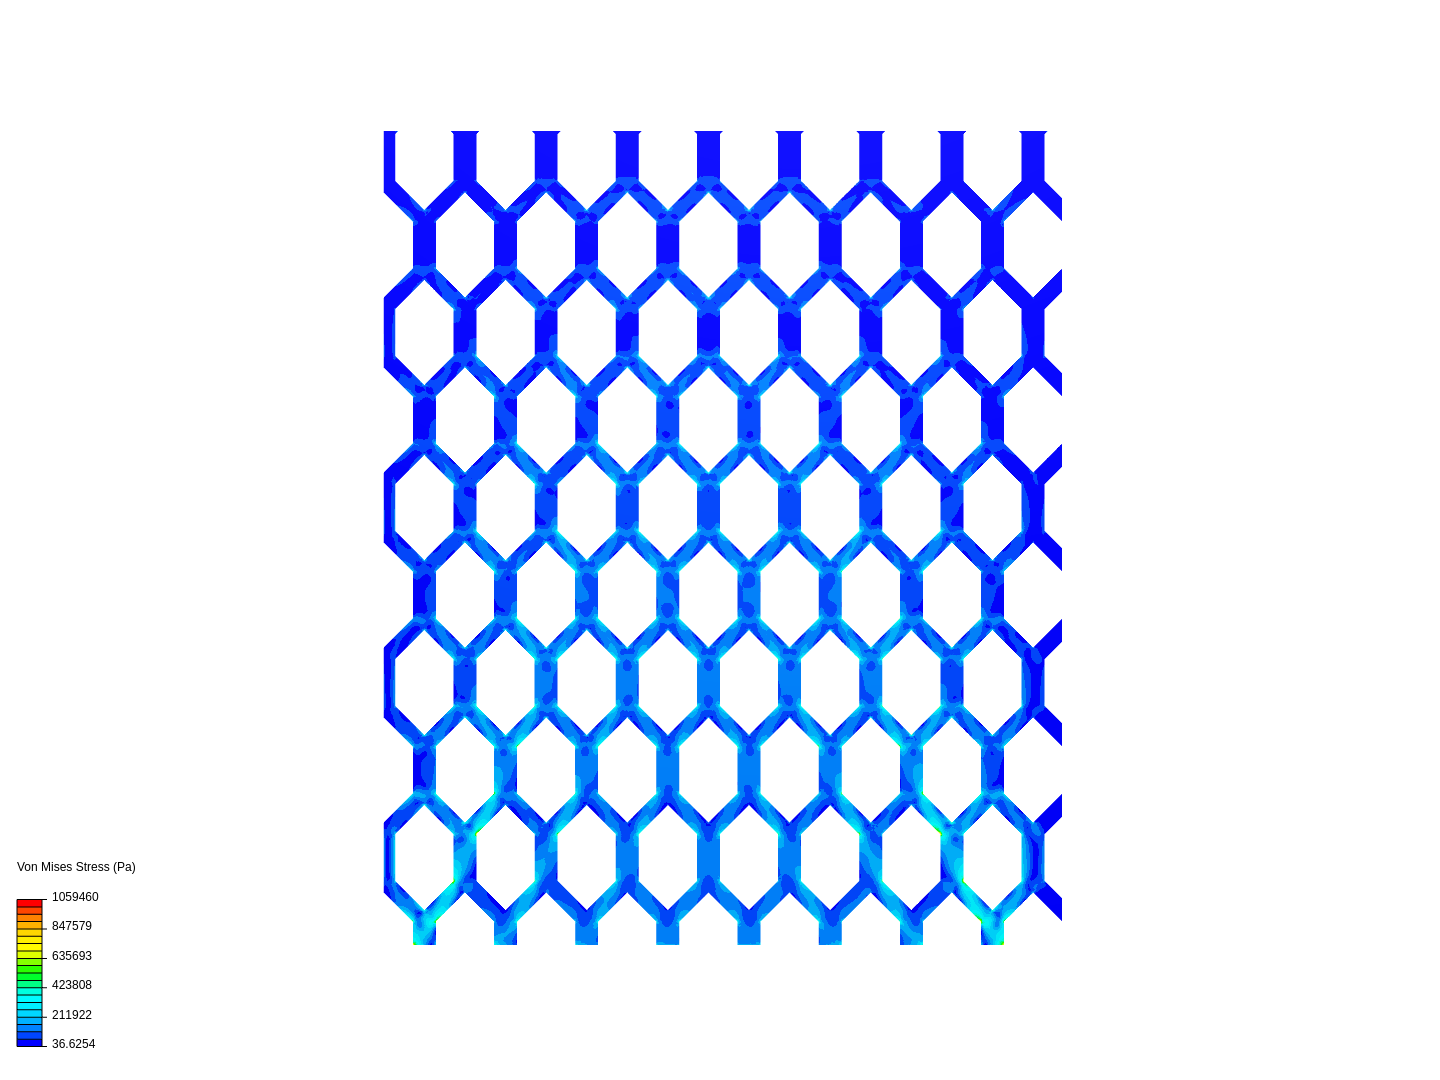 Static Structural Analysis for a Honeycomb Design with different boundary conditions and finding different results such as deformations, stress, strain and many more. image